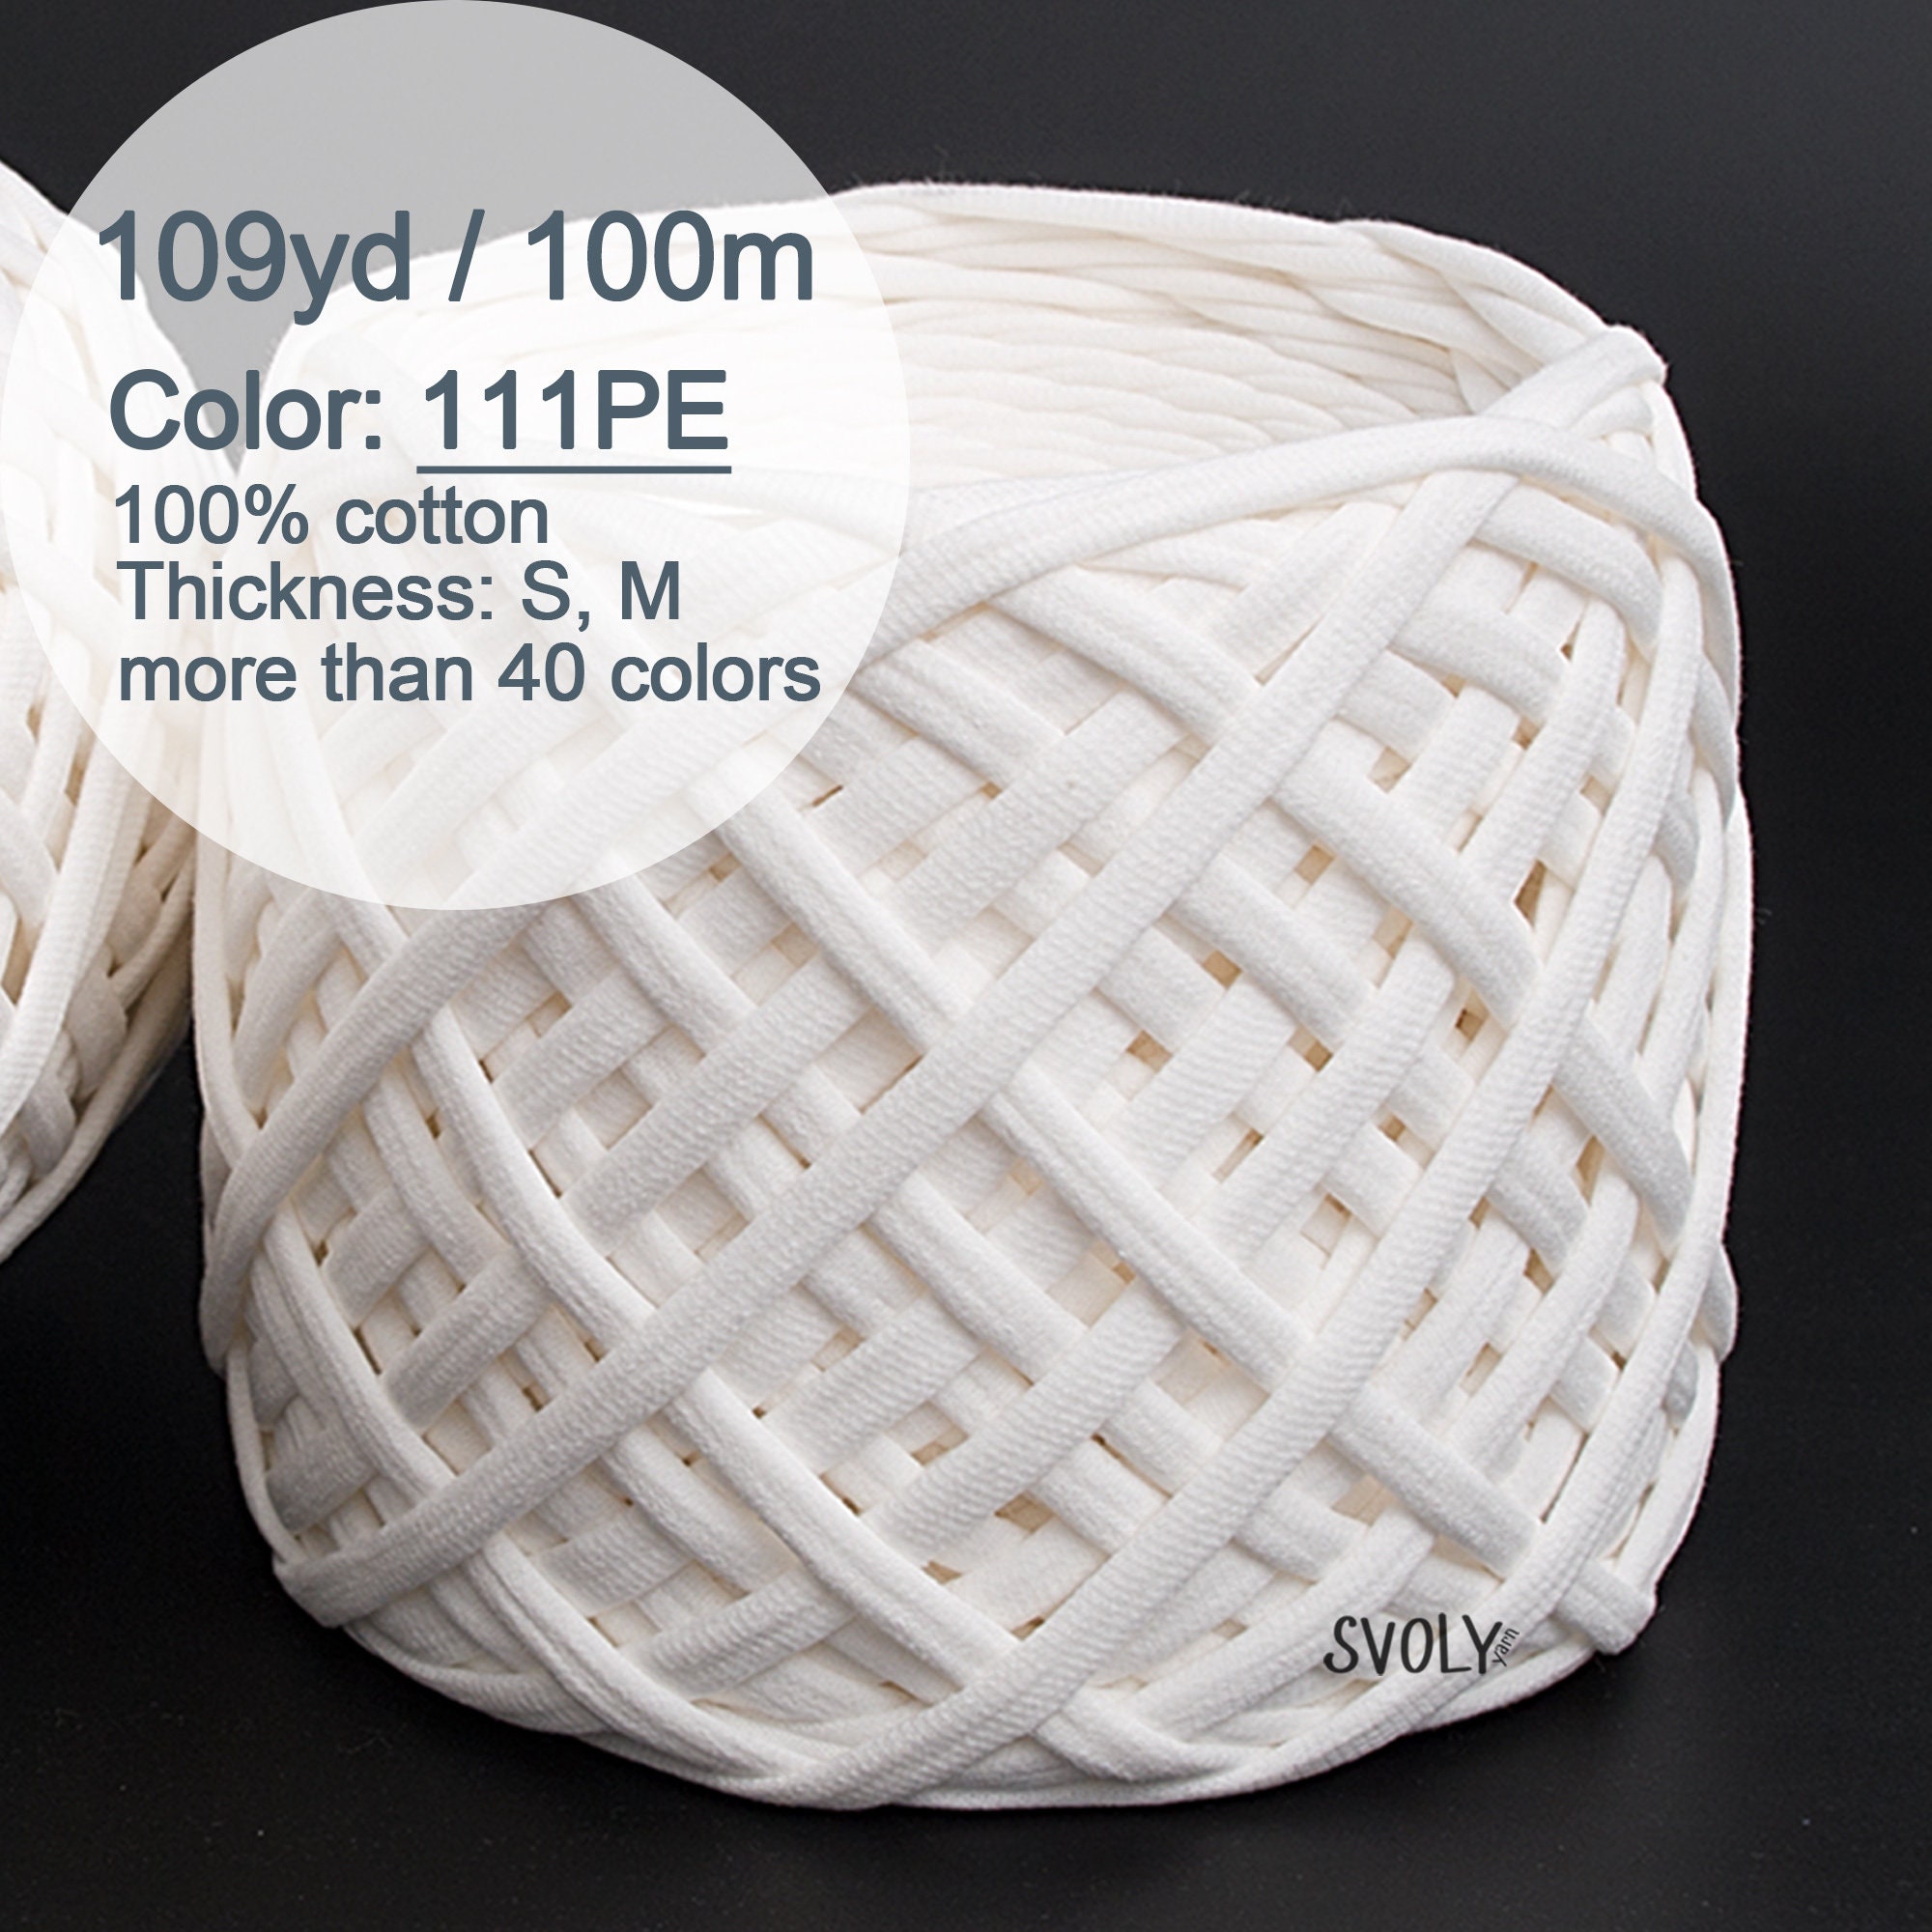 T-shirt Yarn 7-9mm 109yds or 100m for Crochet and Knitting Basket